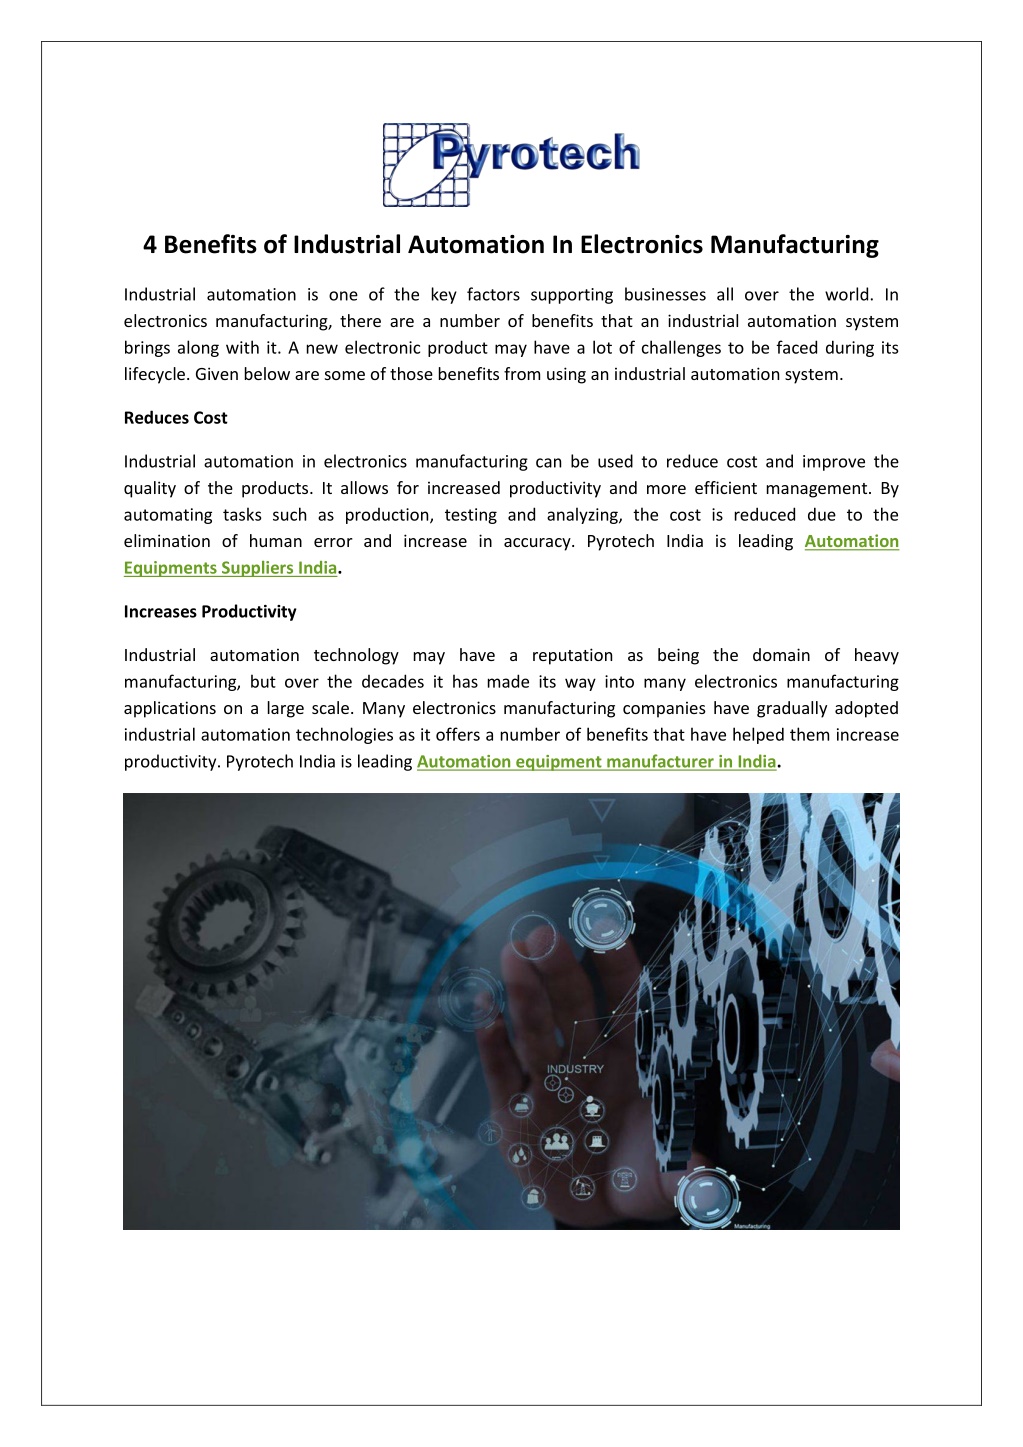 PPT - 4 Benefits of Industrial Automation In Electronics Manufacturing ...